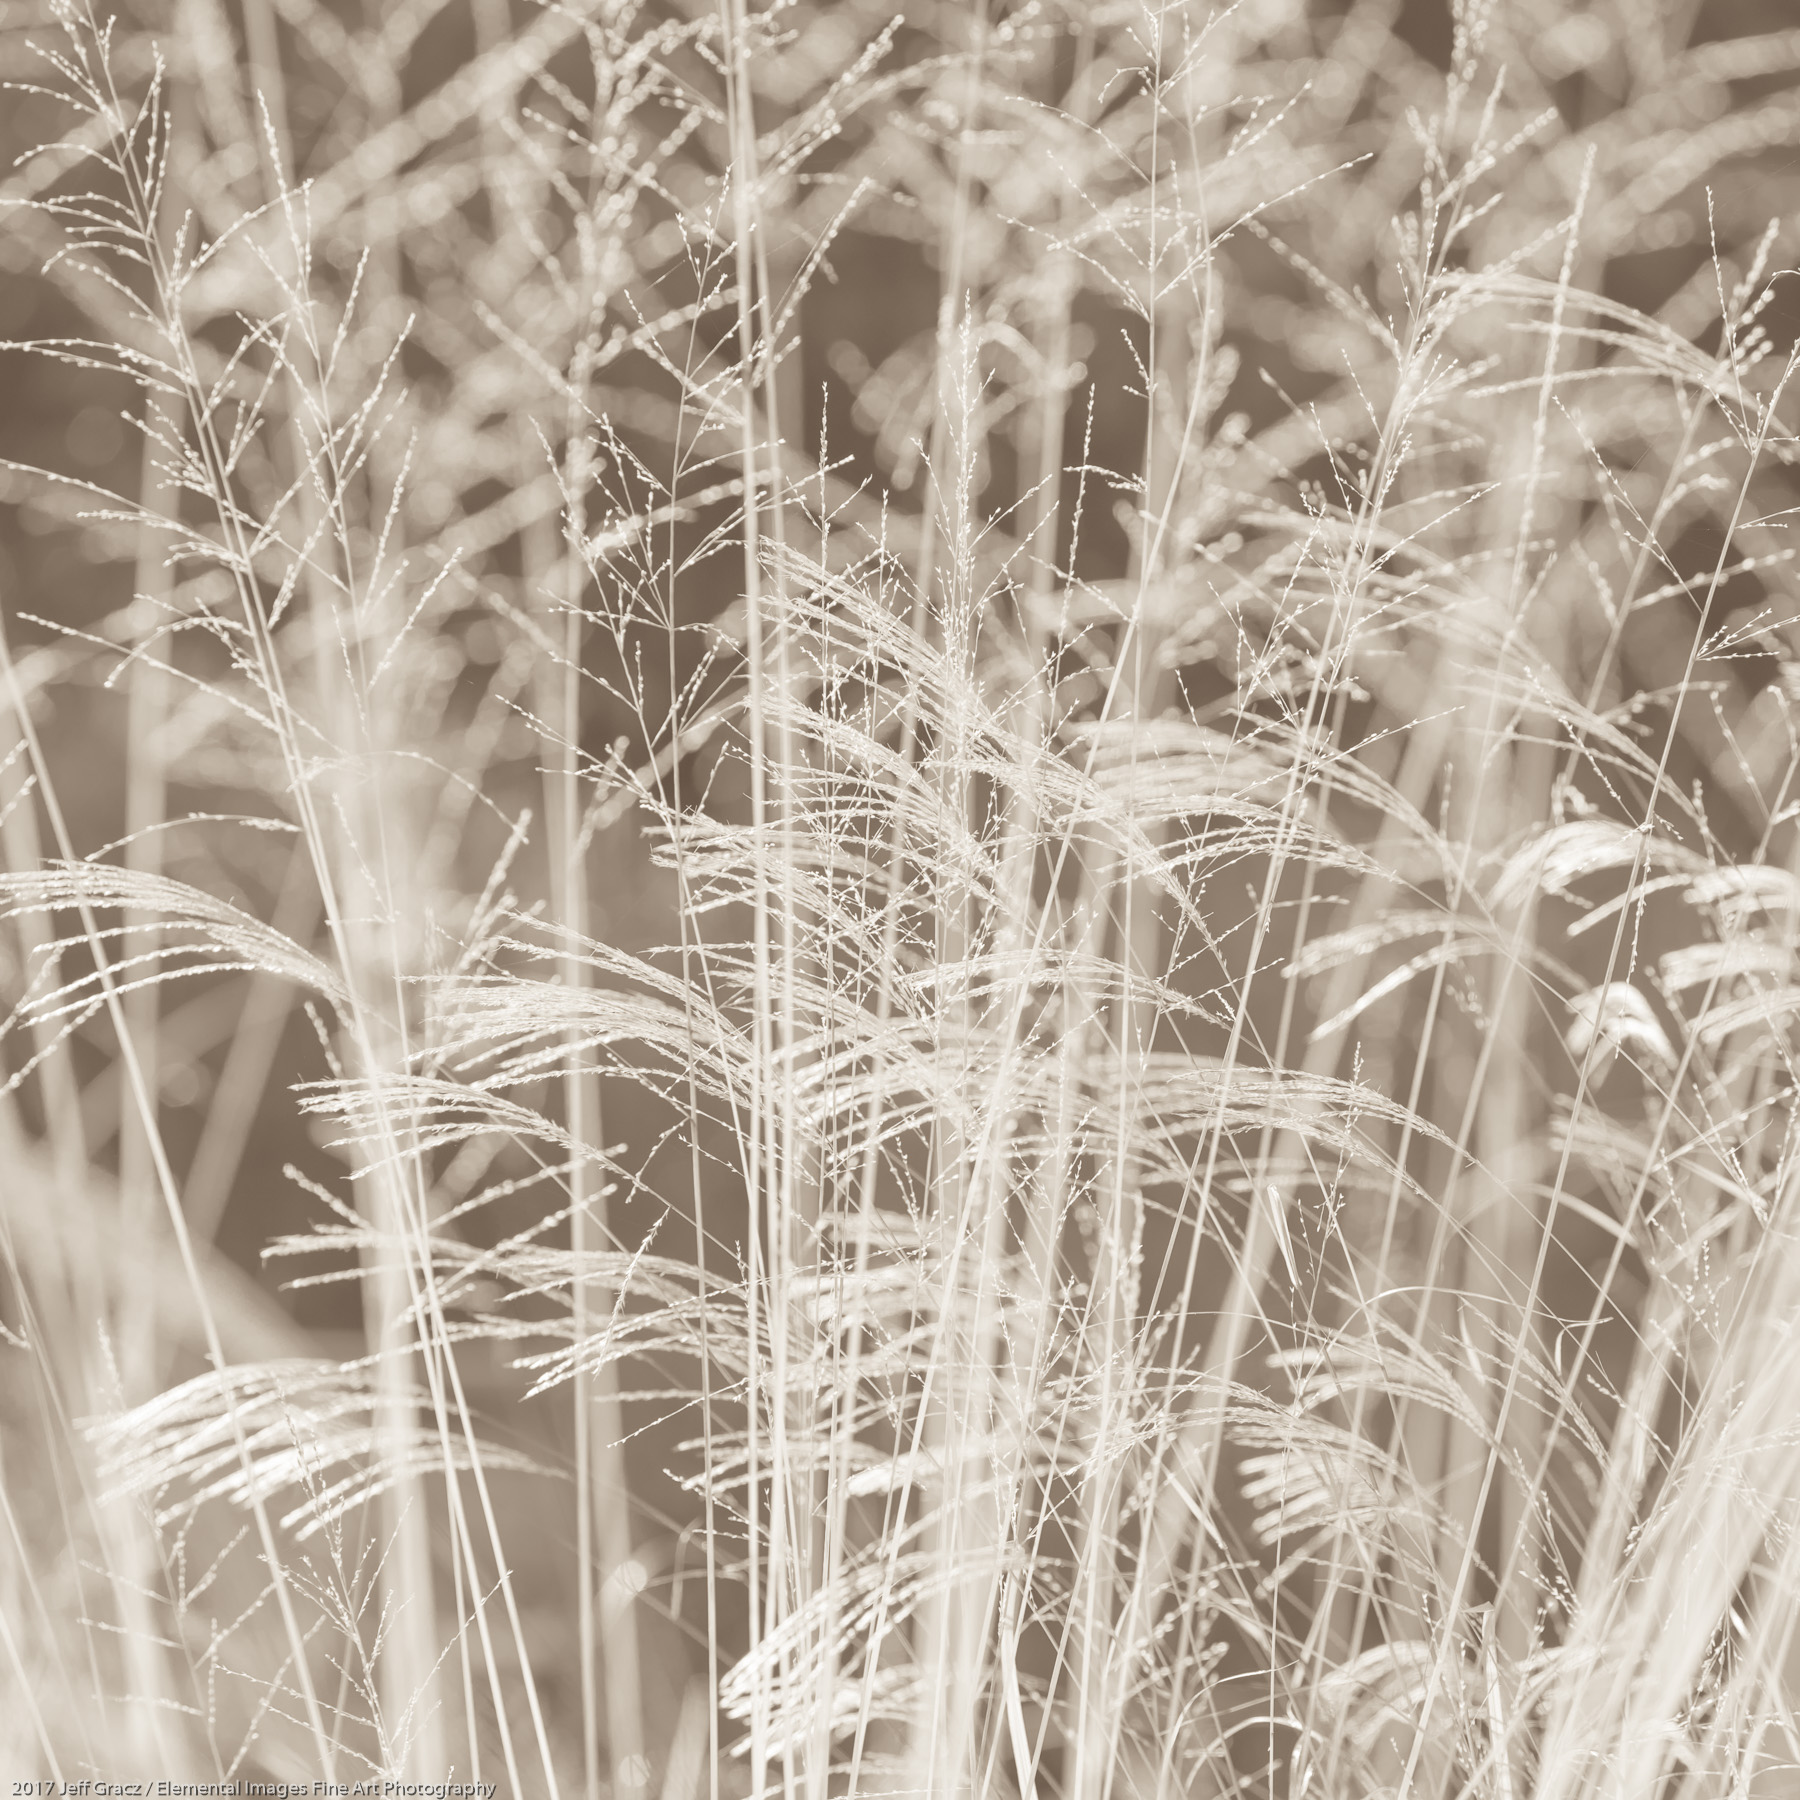 Grasses #151 | Silverton | OR | USA - © 2017 Jeff Gracz / Elemental Images Fine Art Photography - All Rights Reserved Worldwide